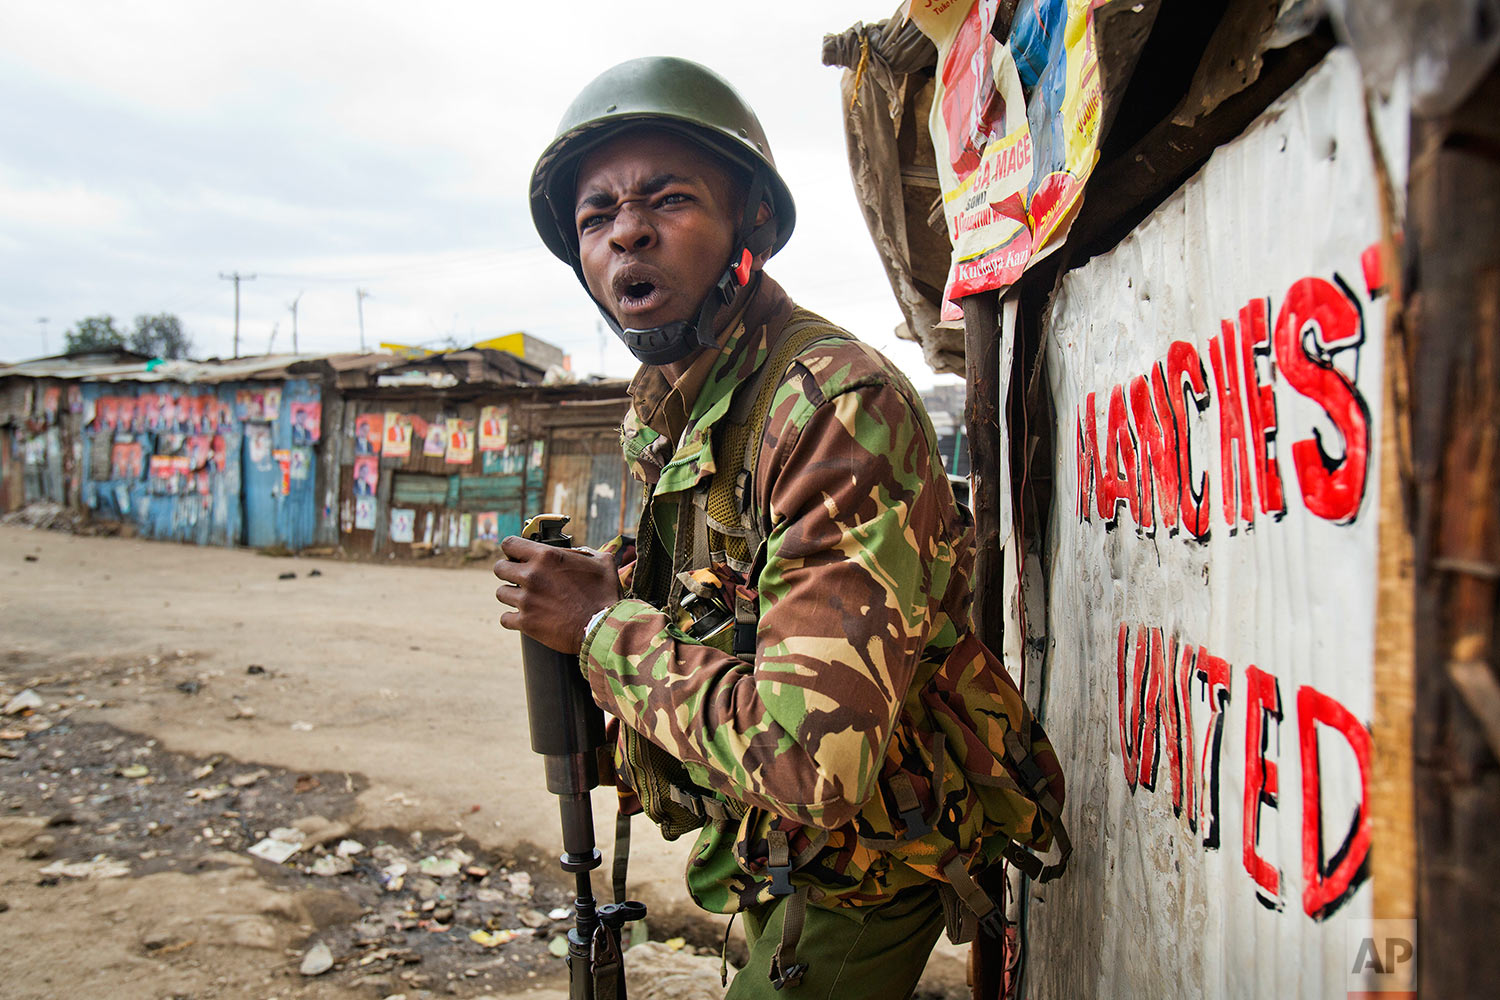  A Kenyan security forces officer shouts before firing a tear gas canister to chase supporters of Kenyan opposition leader and presidential candidate Raila Odinga, who demonstrated in the Mathare area of Nairobi, Wednesday, Aug. 9, 2017. Odinga alleges that hackers manipulated the Tuesday election results which appear to show President Uhuru Kenyatta has a wide lead over Odinga. (AP Photo/Jerome Delay) 